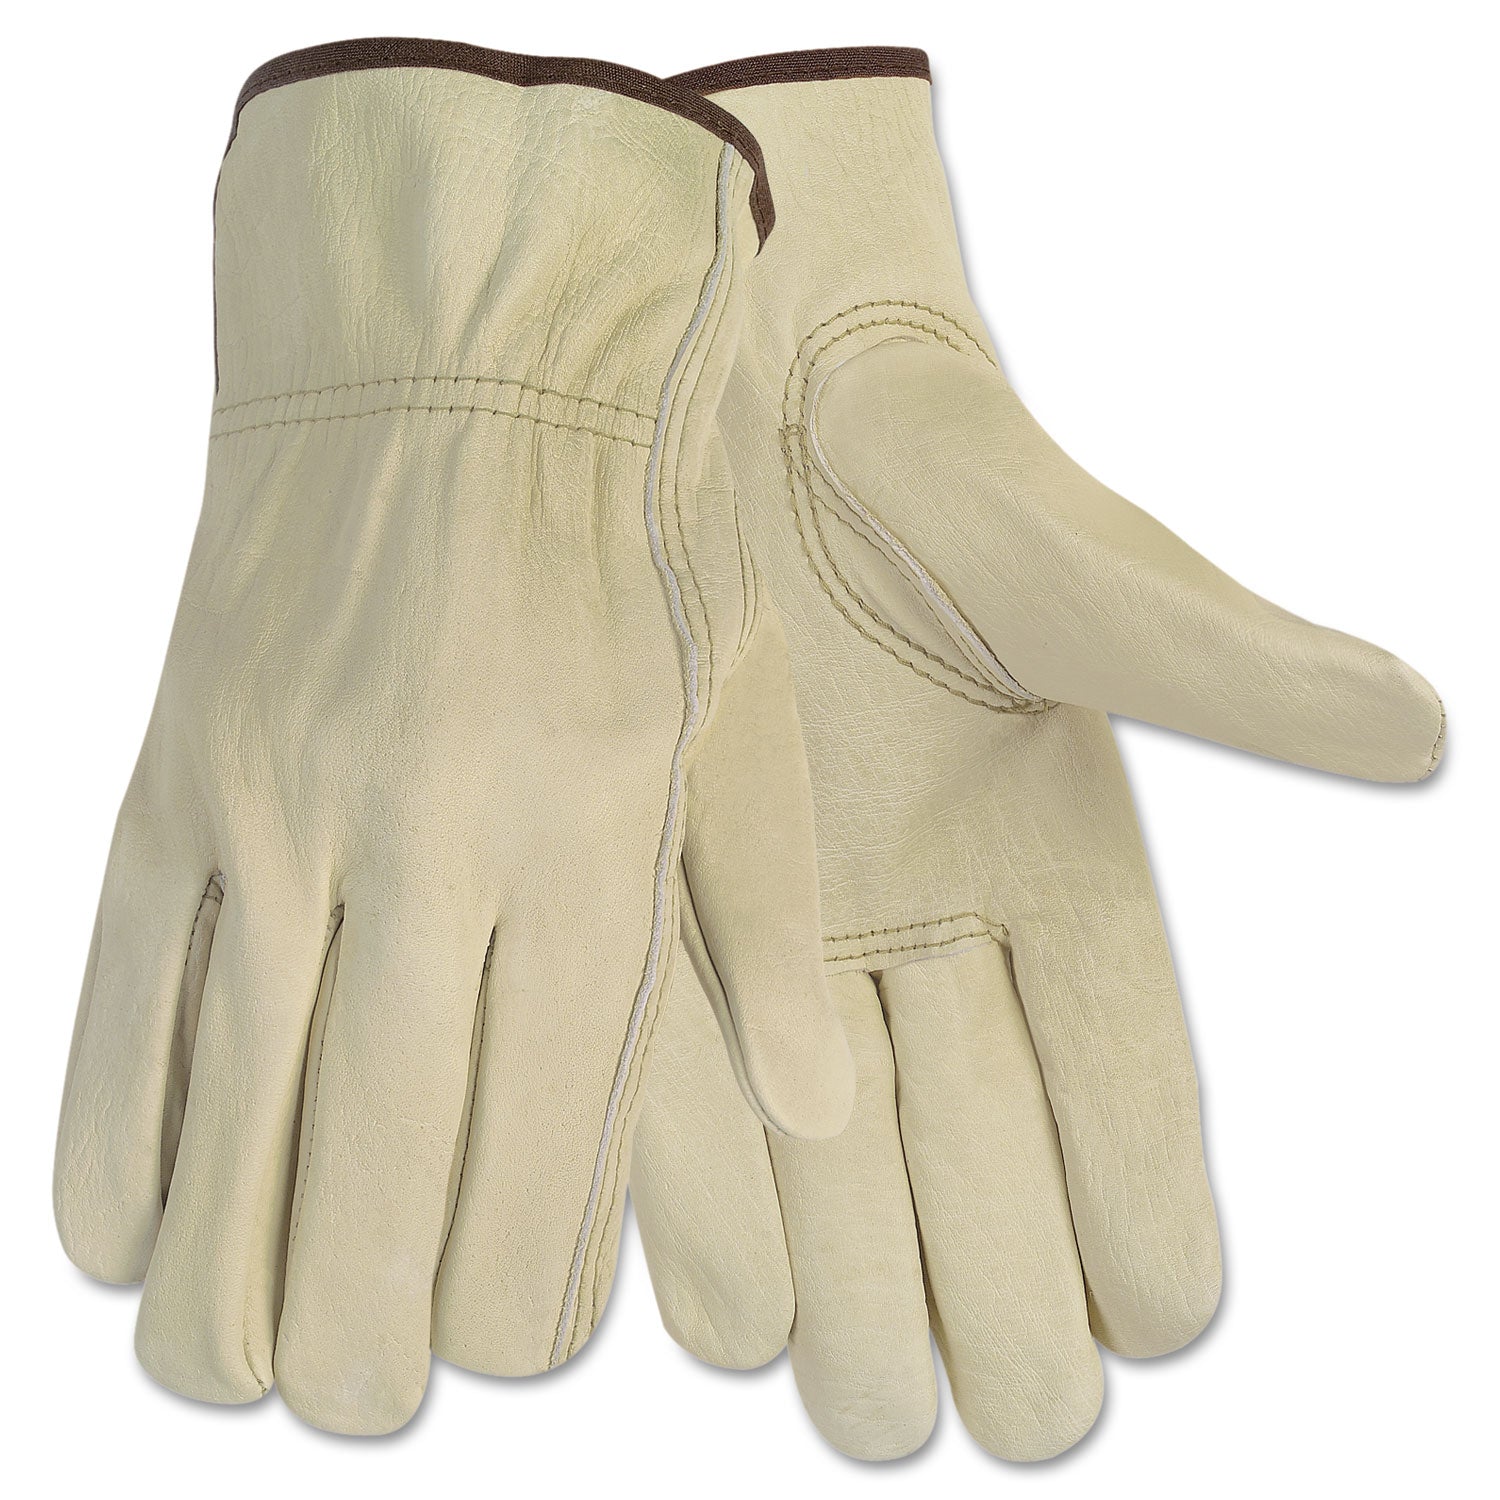 Economy Leather Driver Gloves, Large, Beige, Pair - 